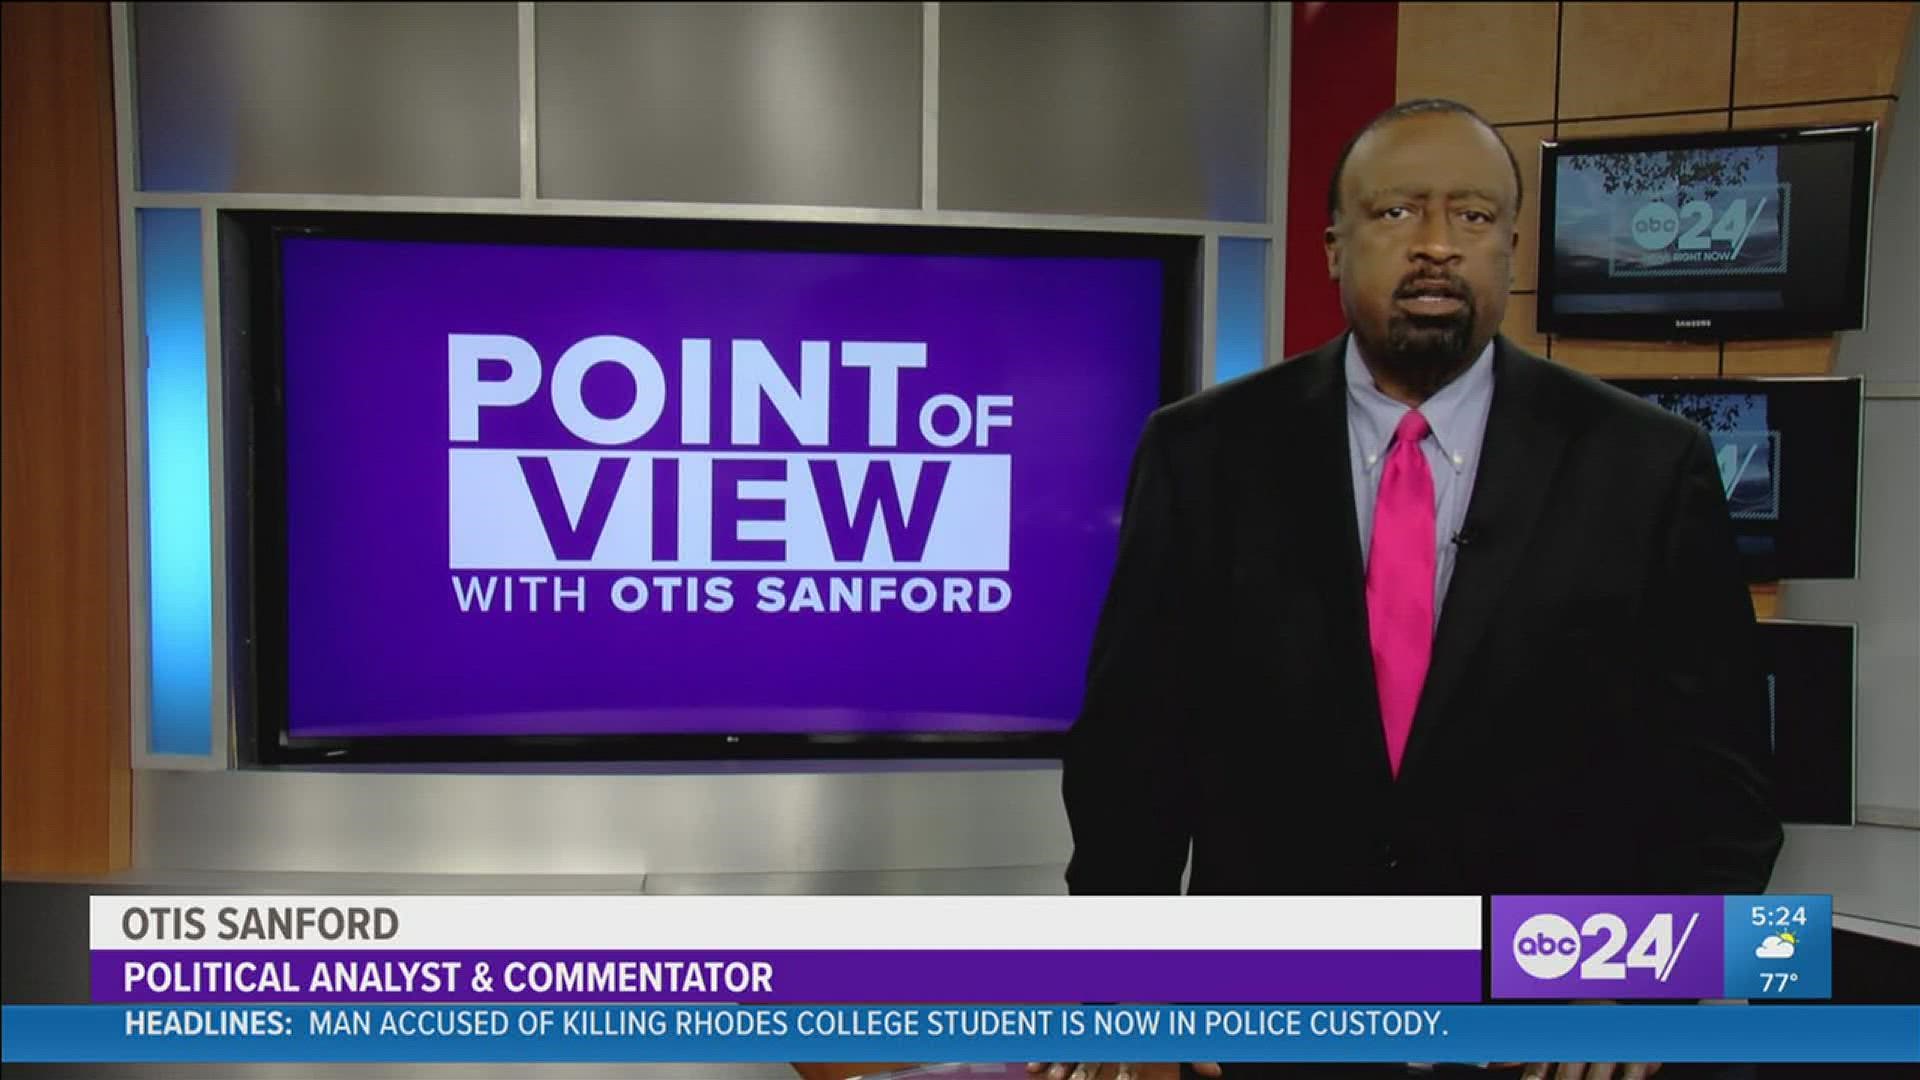 Political analyst and commentator Otis Sanford shared his point of view on the possibility of a new stadium for the University of Memphis.